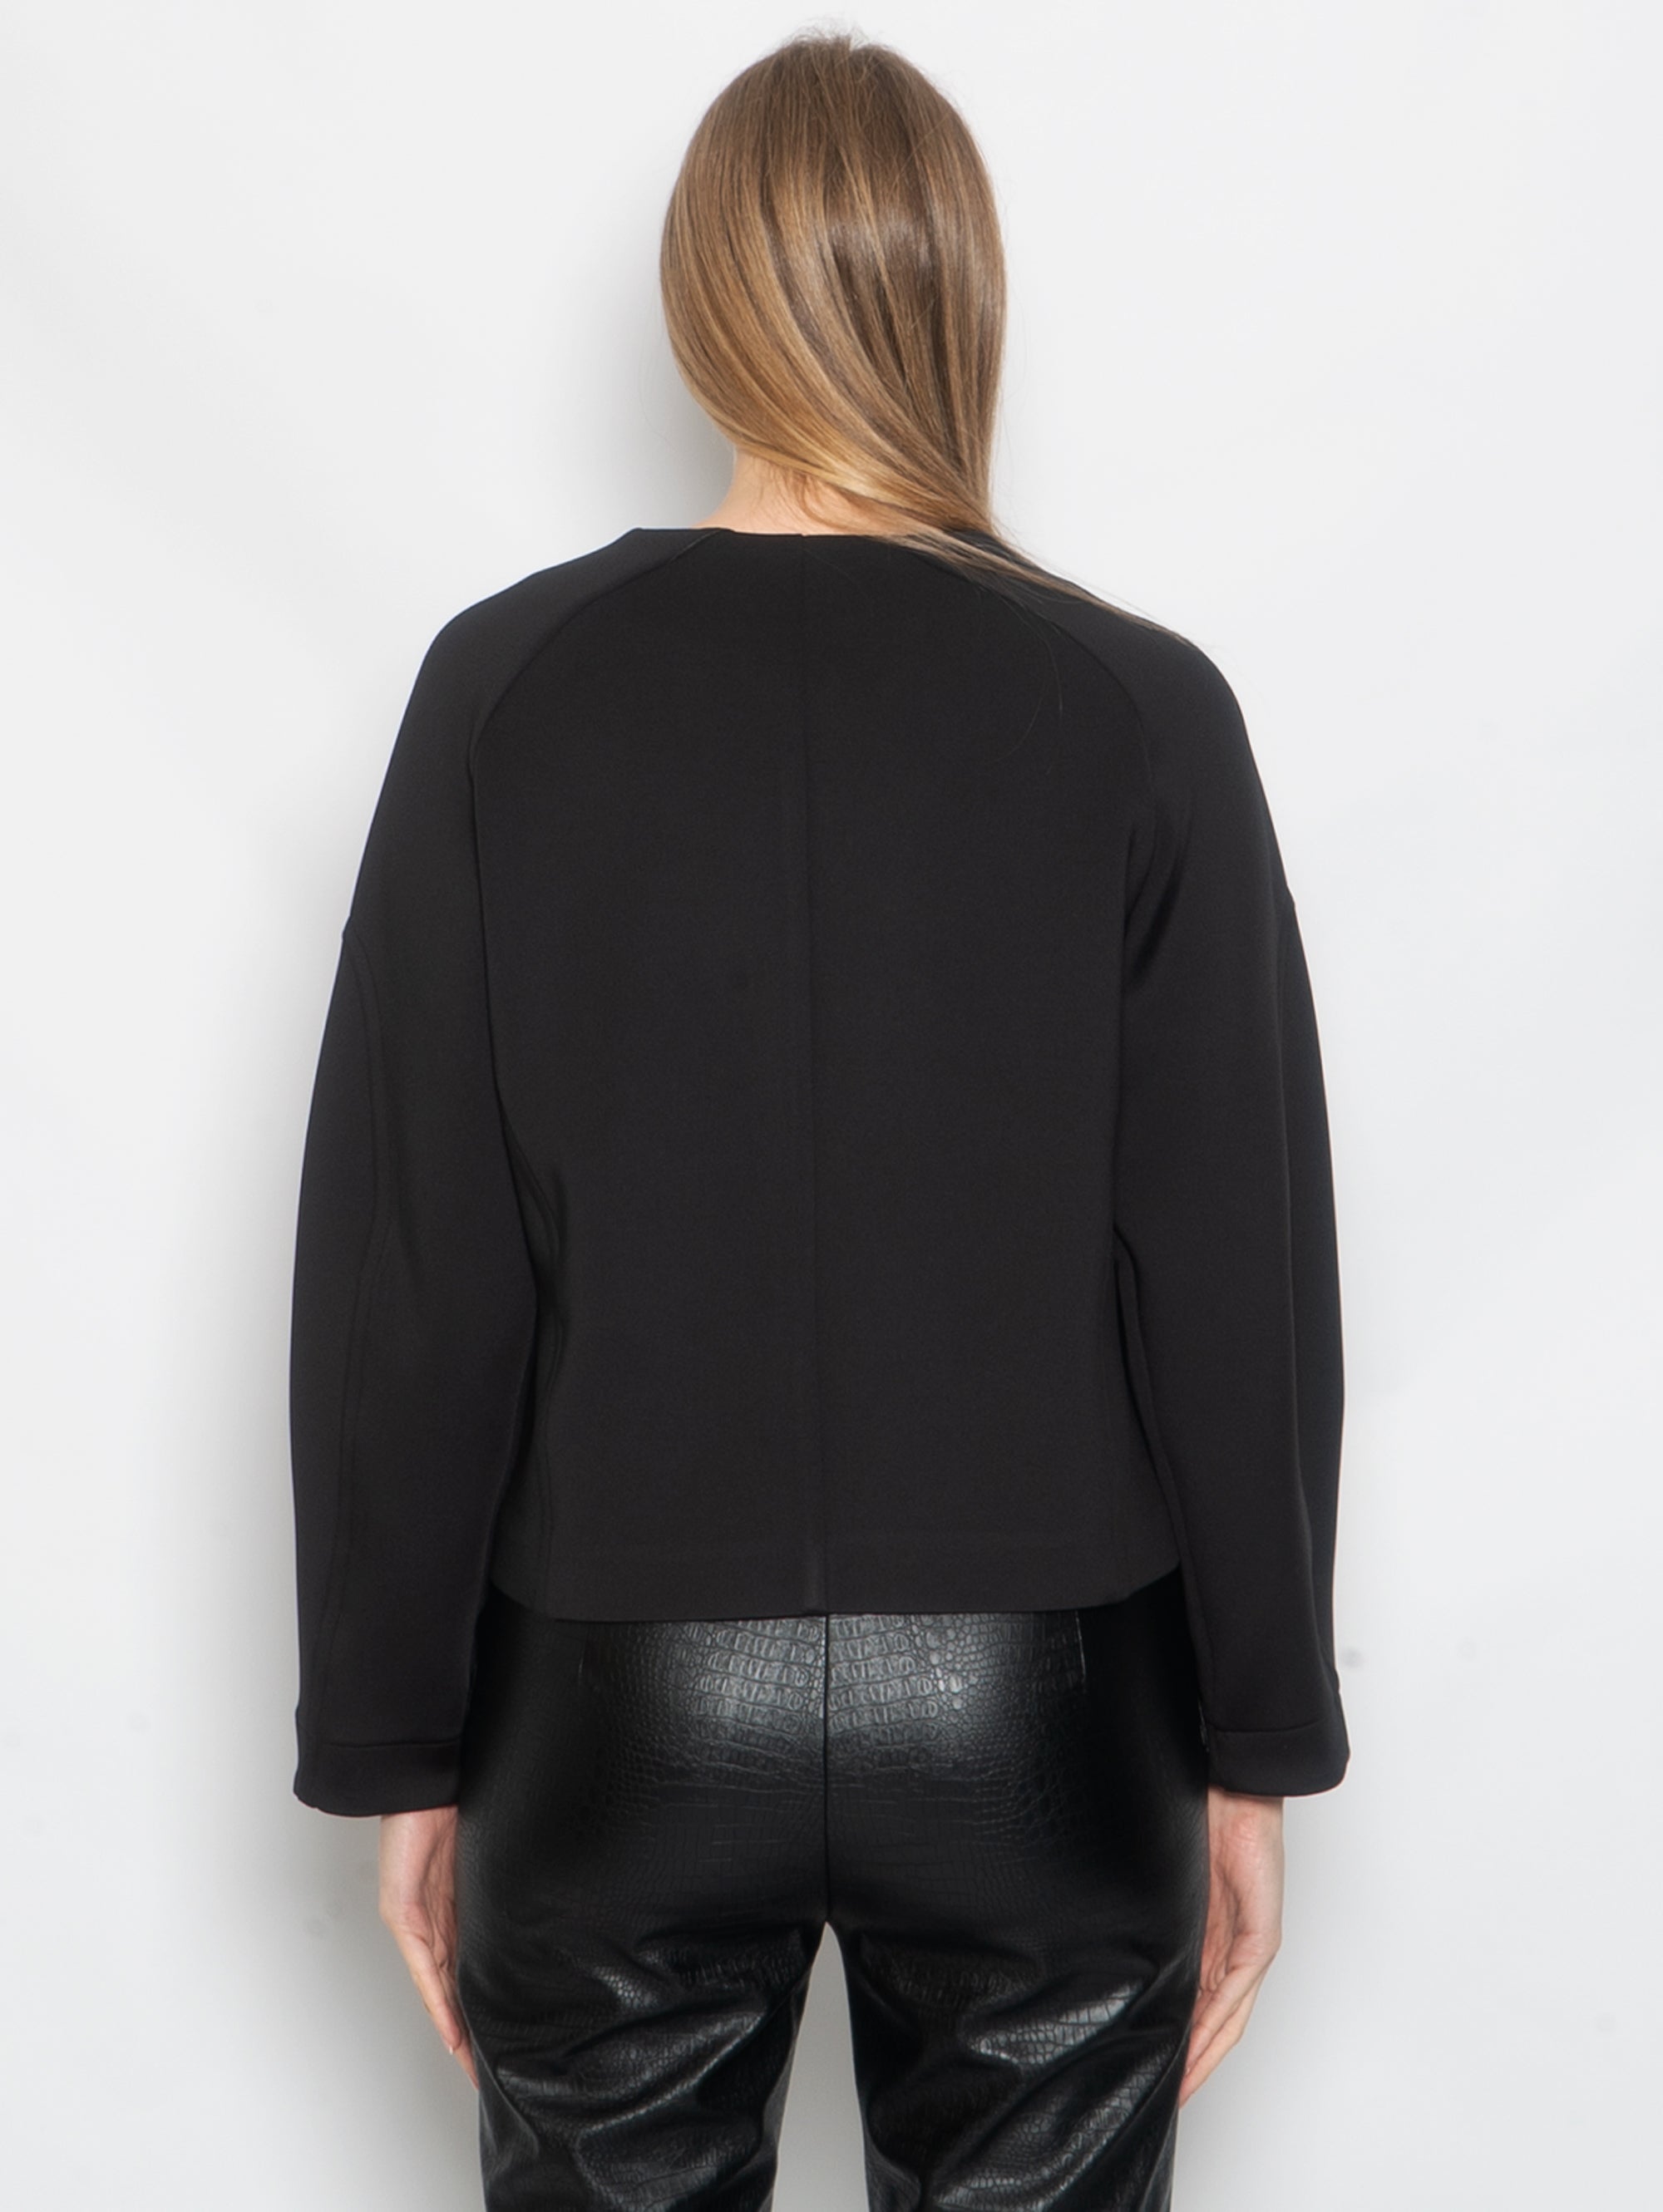 Short jacket in black technical fabric